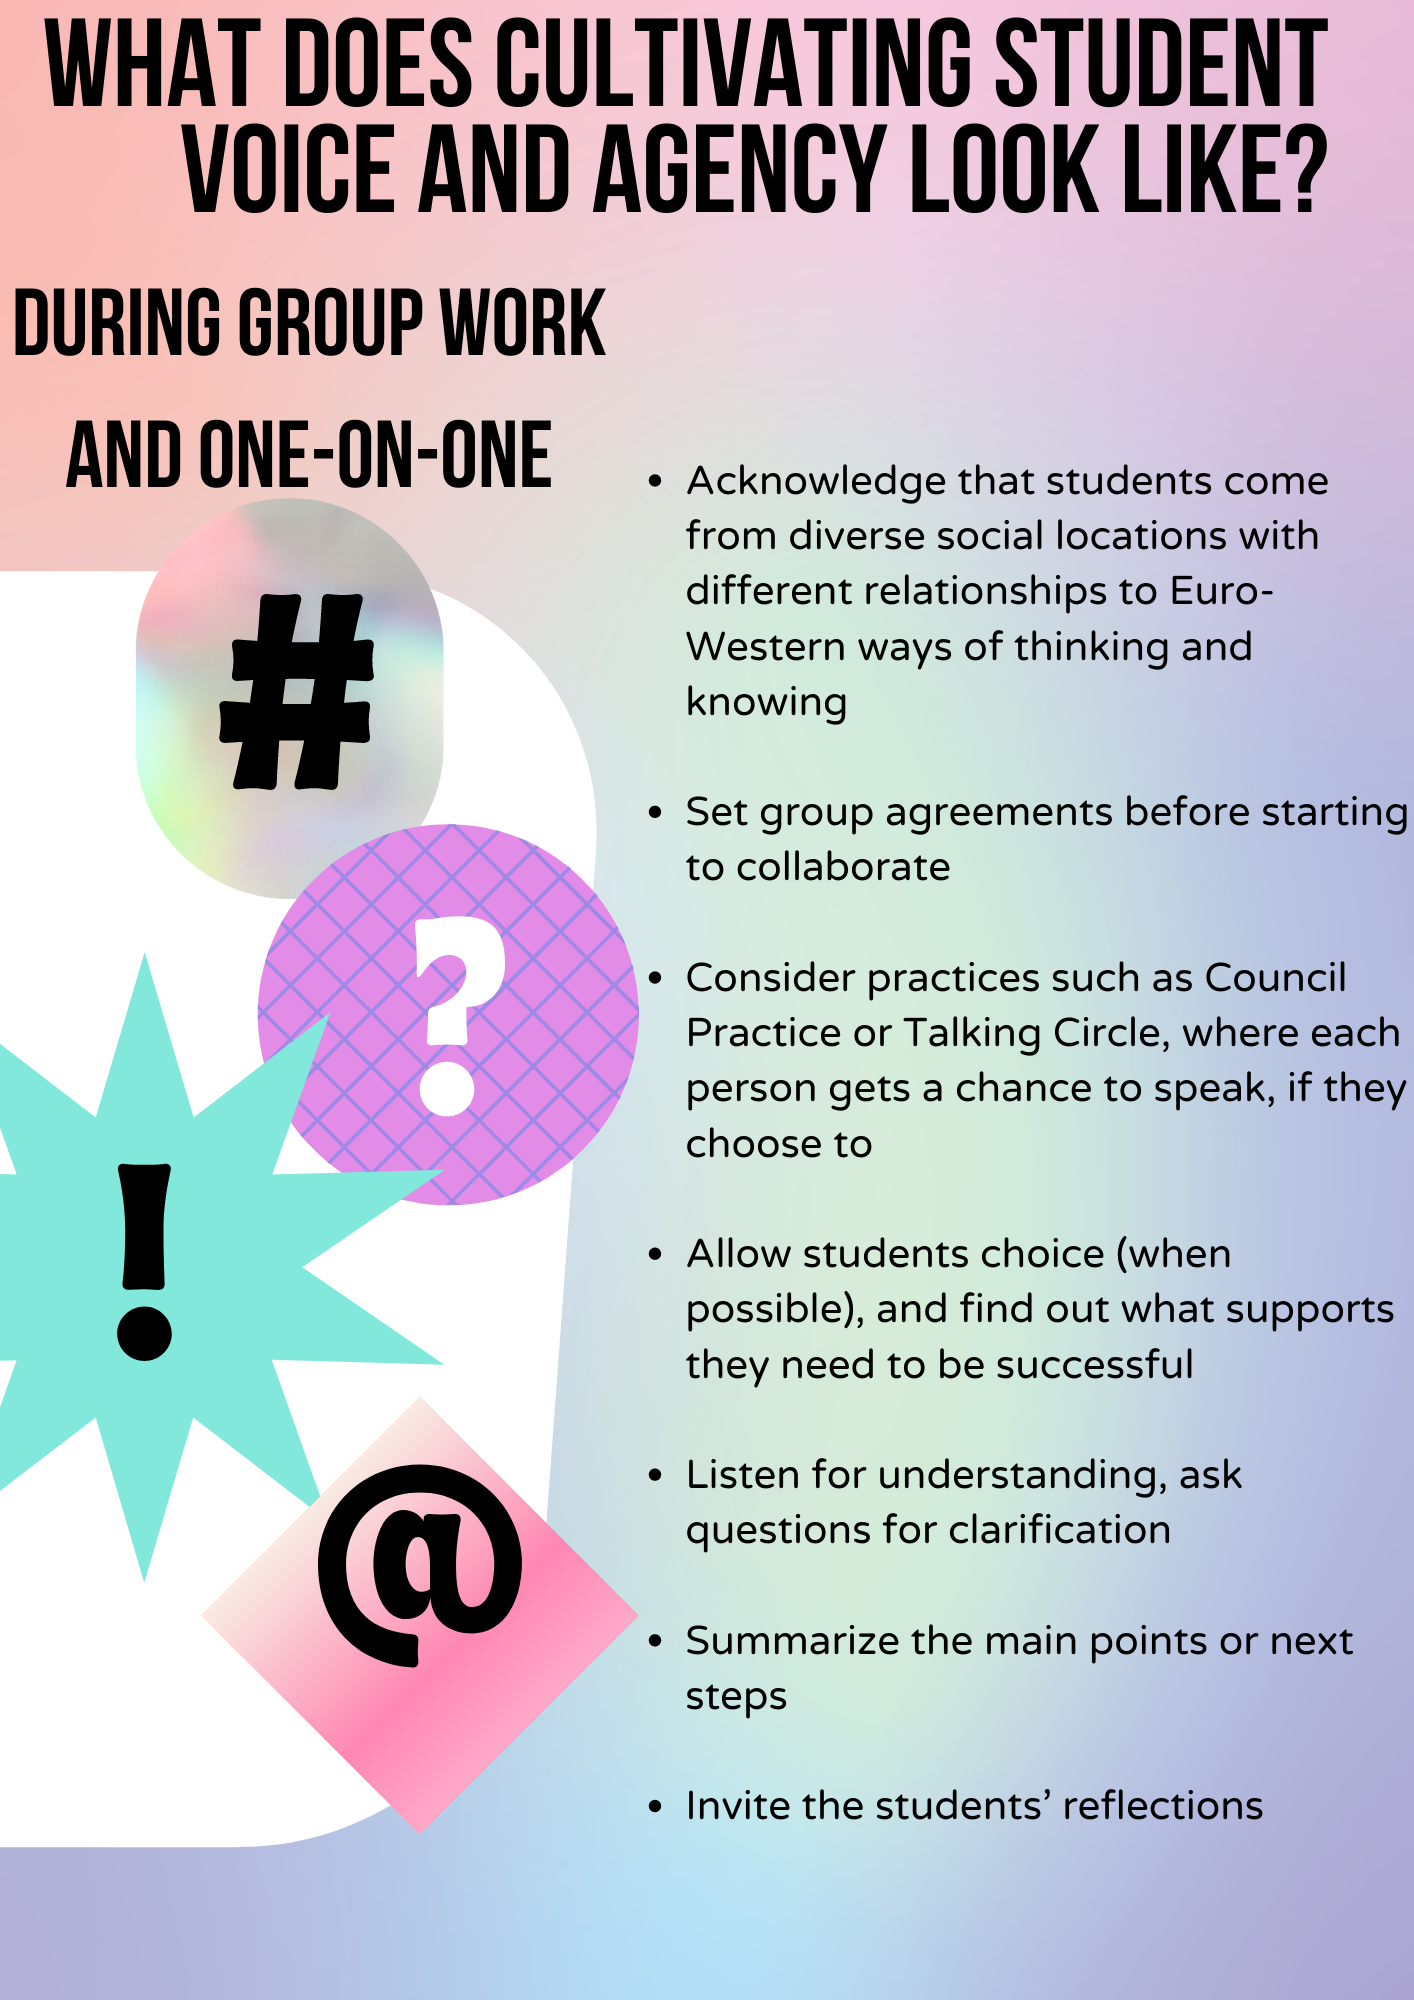 What does cultivating student voice and agency look like? During Group work and one-on-one Acknowledge that students come from diverse social locations with different relationships to Euro-Western ways of thinking and knowing Set group agreements before starting to collaborate Consider practices such as Council Practice or Talking Circle, where each person gets a chance to speak, if they choose to Allow students choice (when possible), and find out what supports they need to be successful Listen for understanding, ask questions for clarification Summarize the main points or next steps Invite the students’ reflections